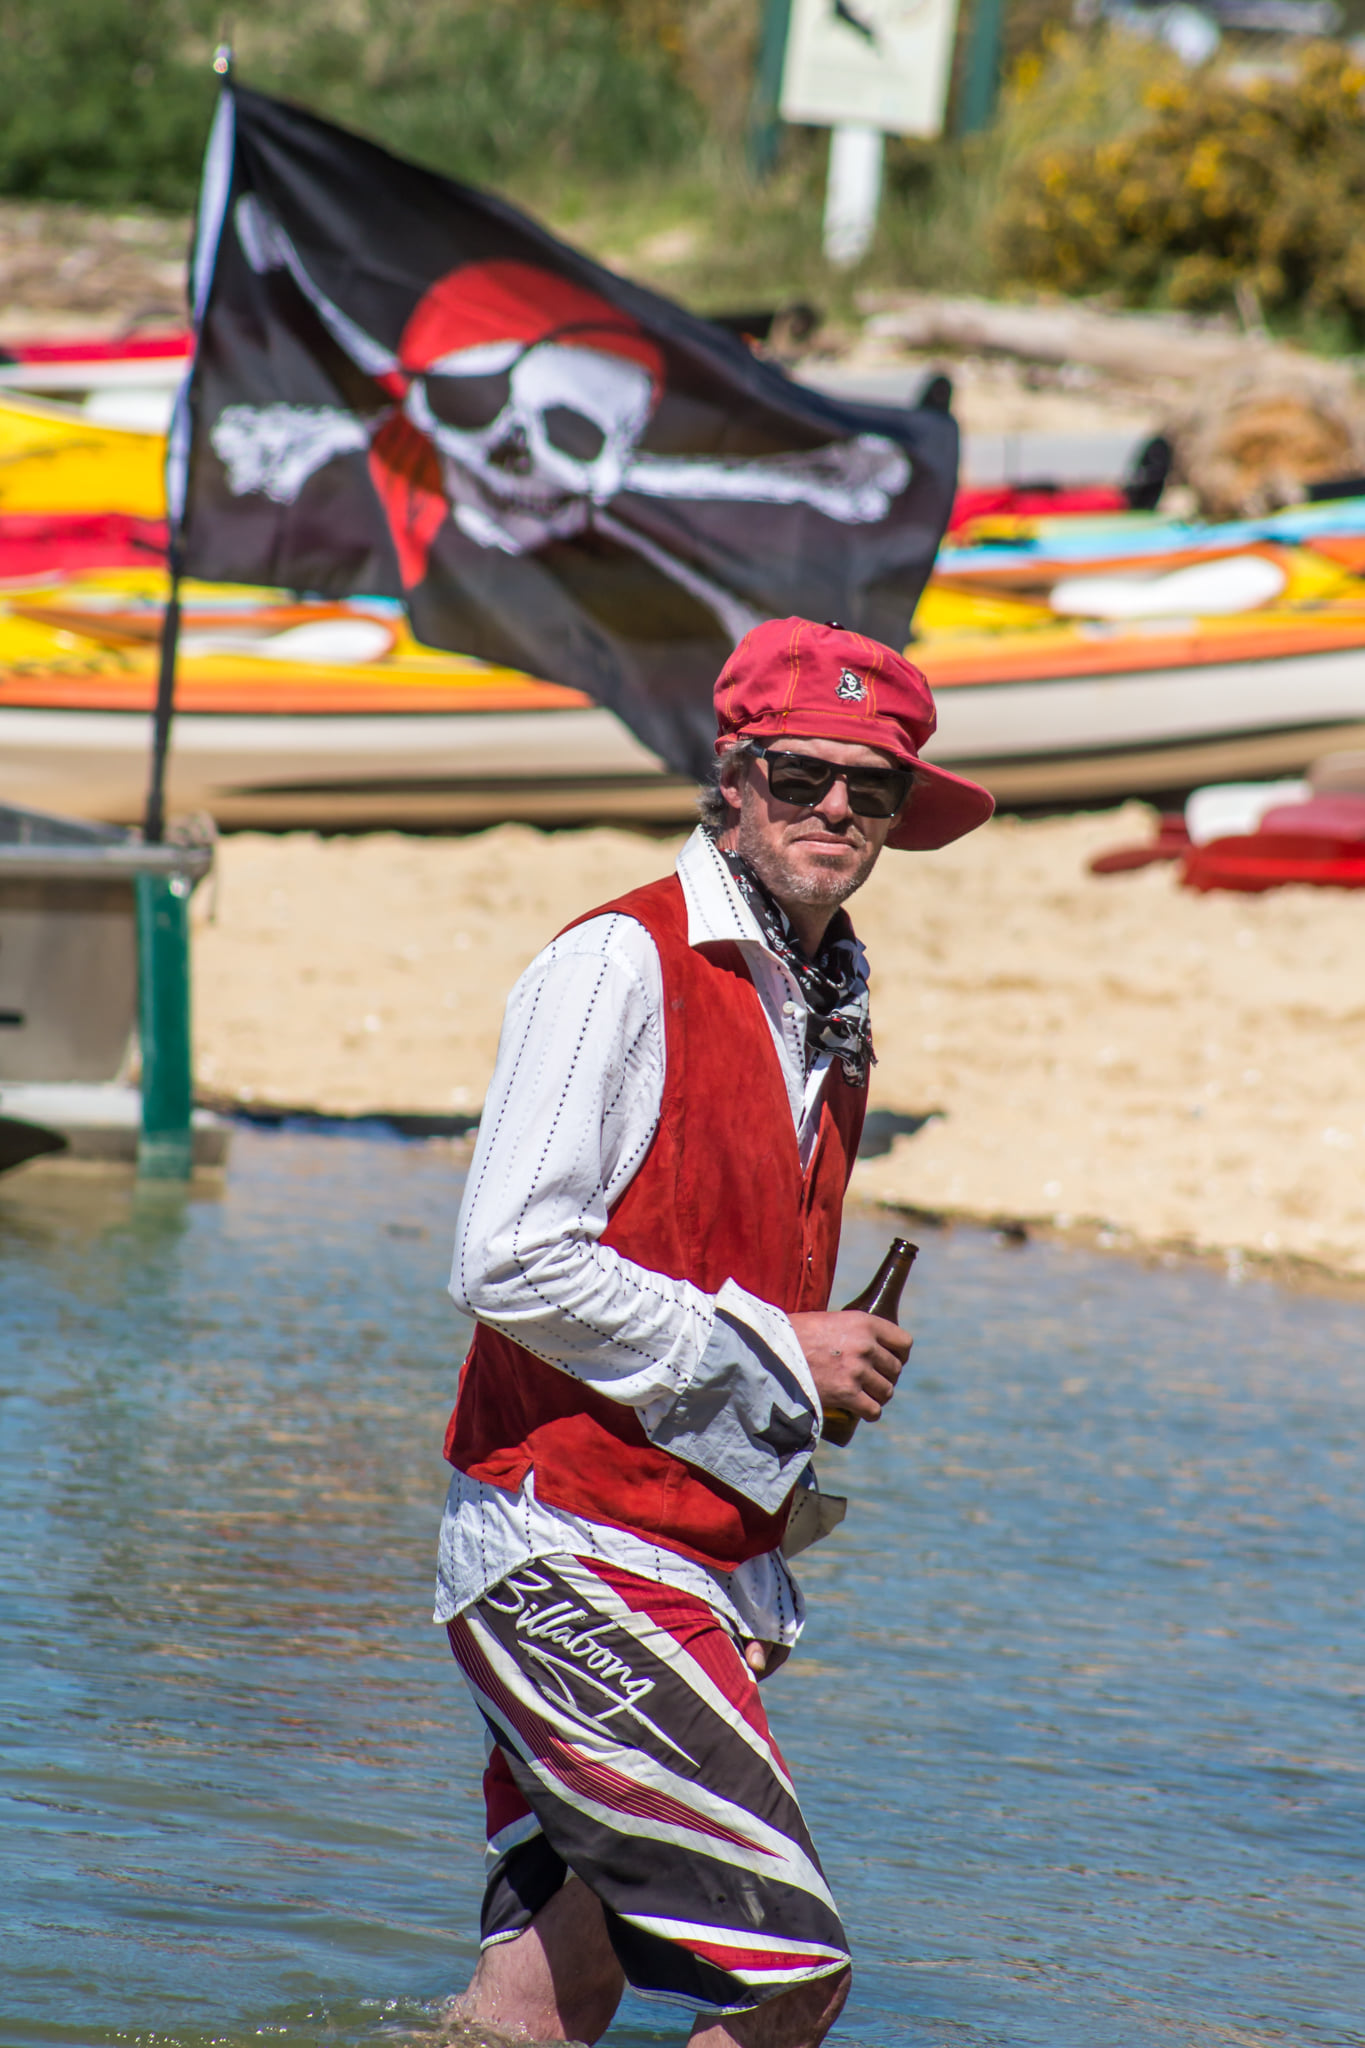 man on beach in pirate dress-up with pirate flag